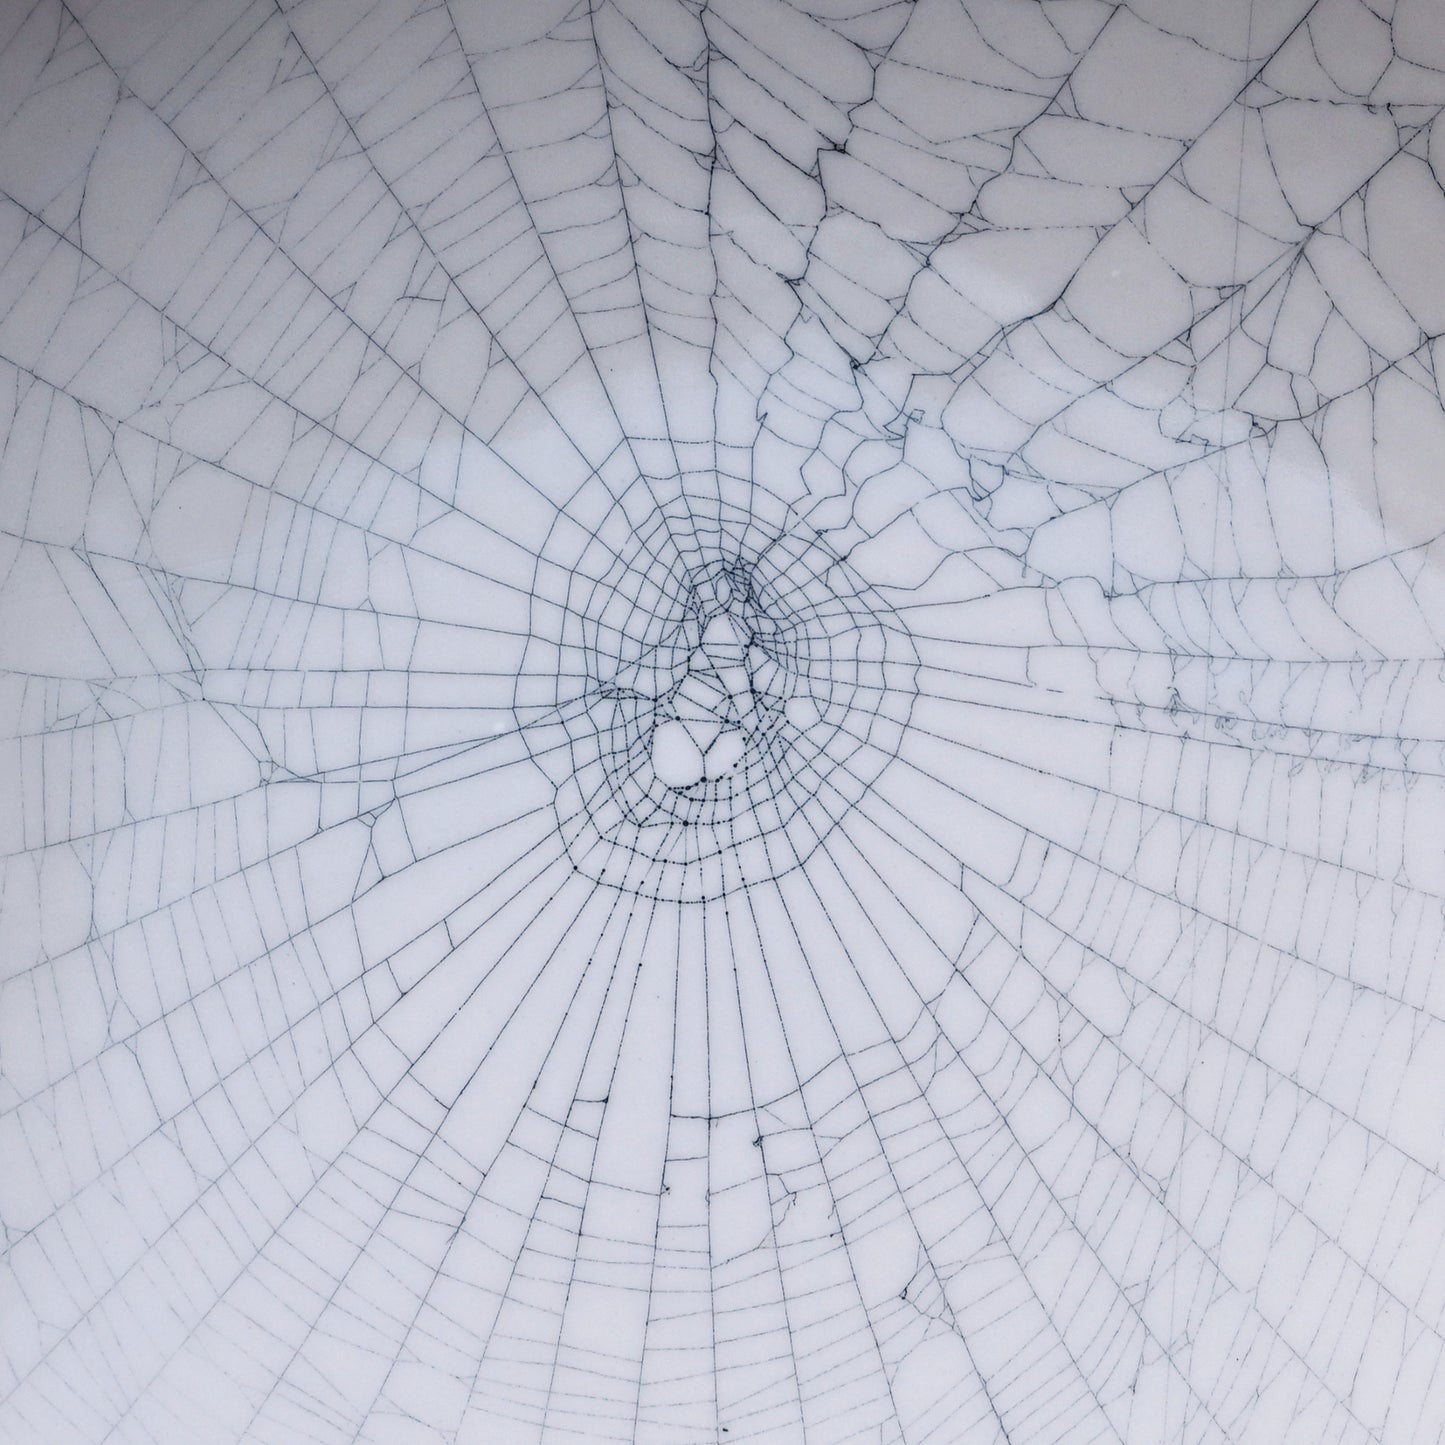 Web on Clay (265), Collected October 08, 2022